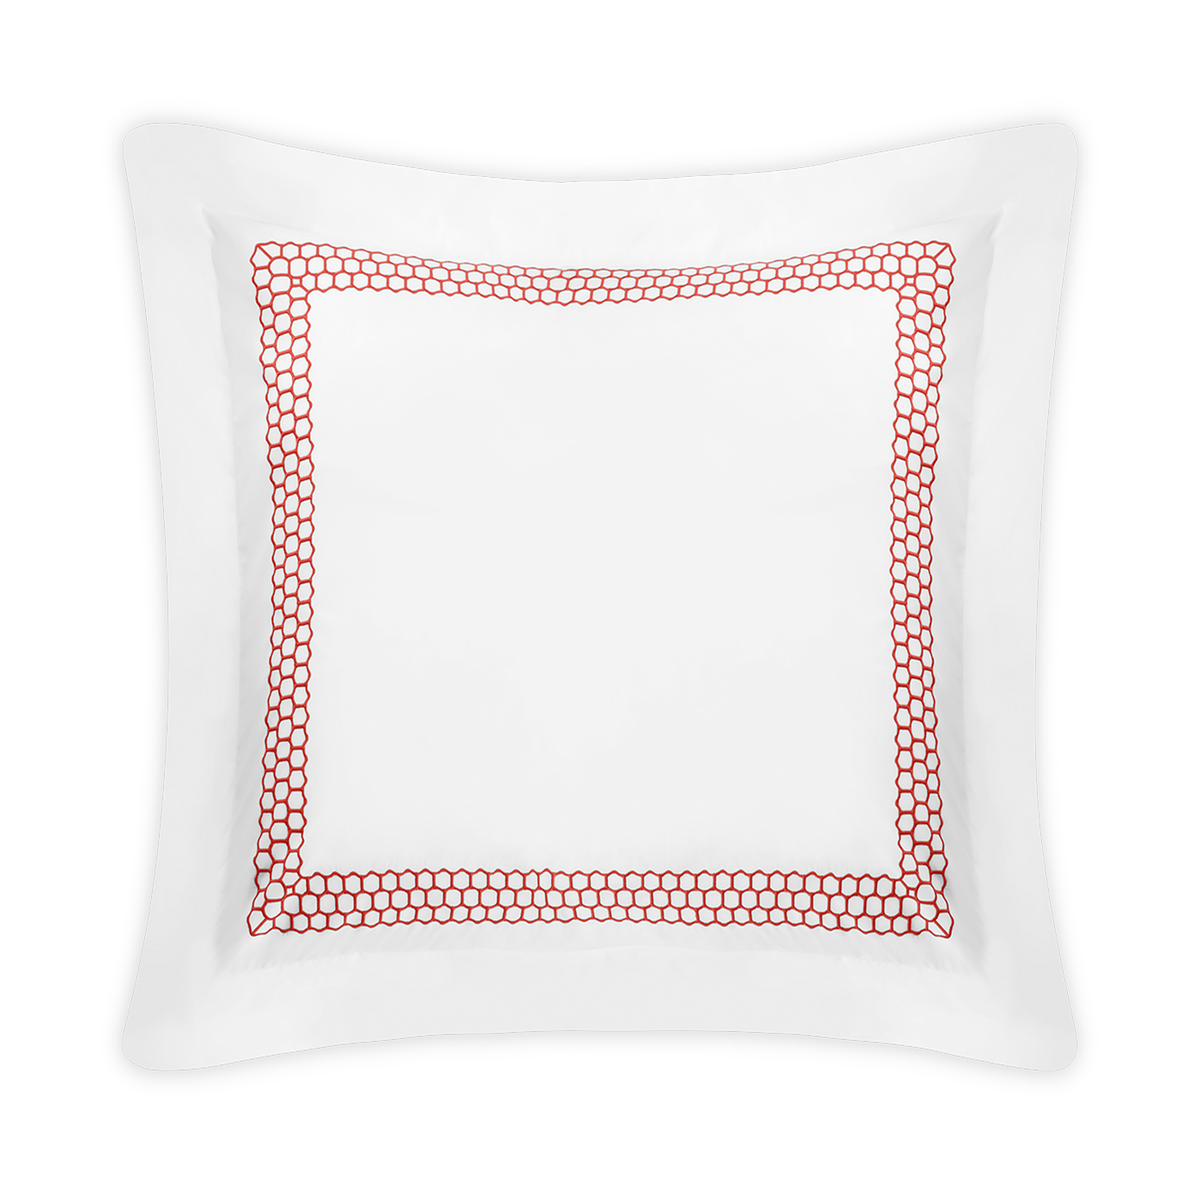 Clear Image of Matouk Liana Bedding Euro Sham in Coral Color